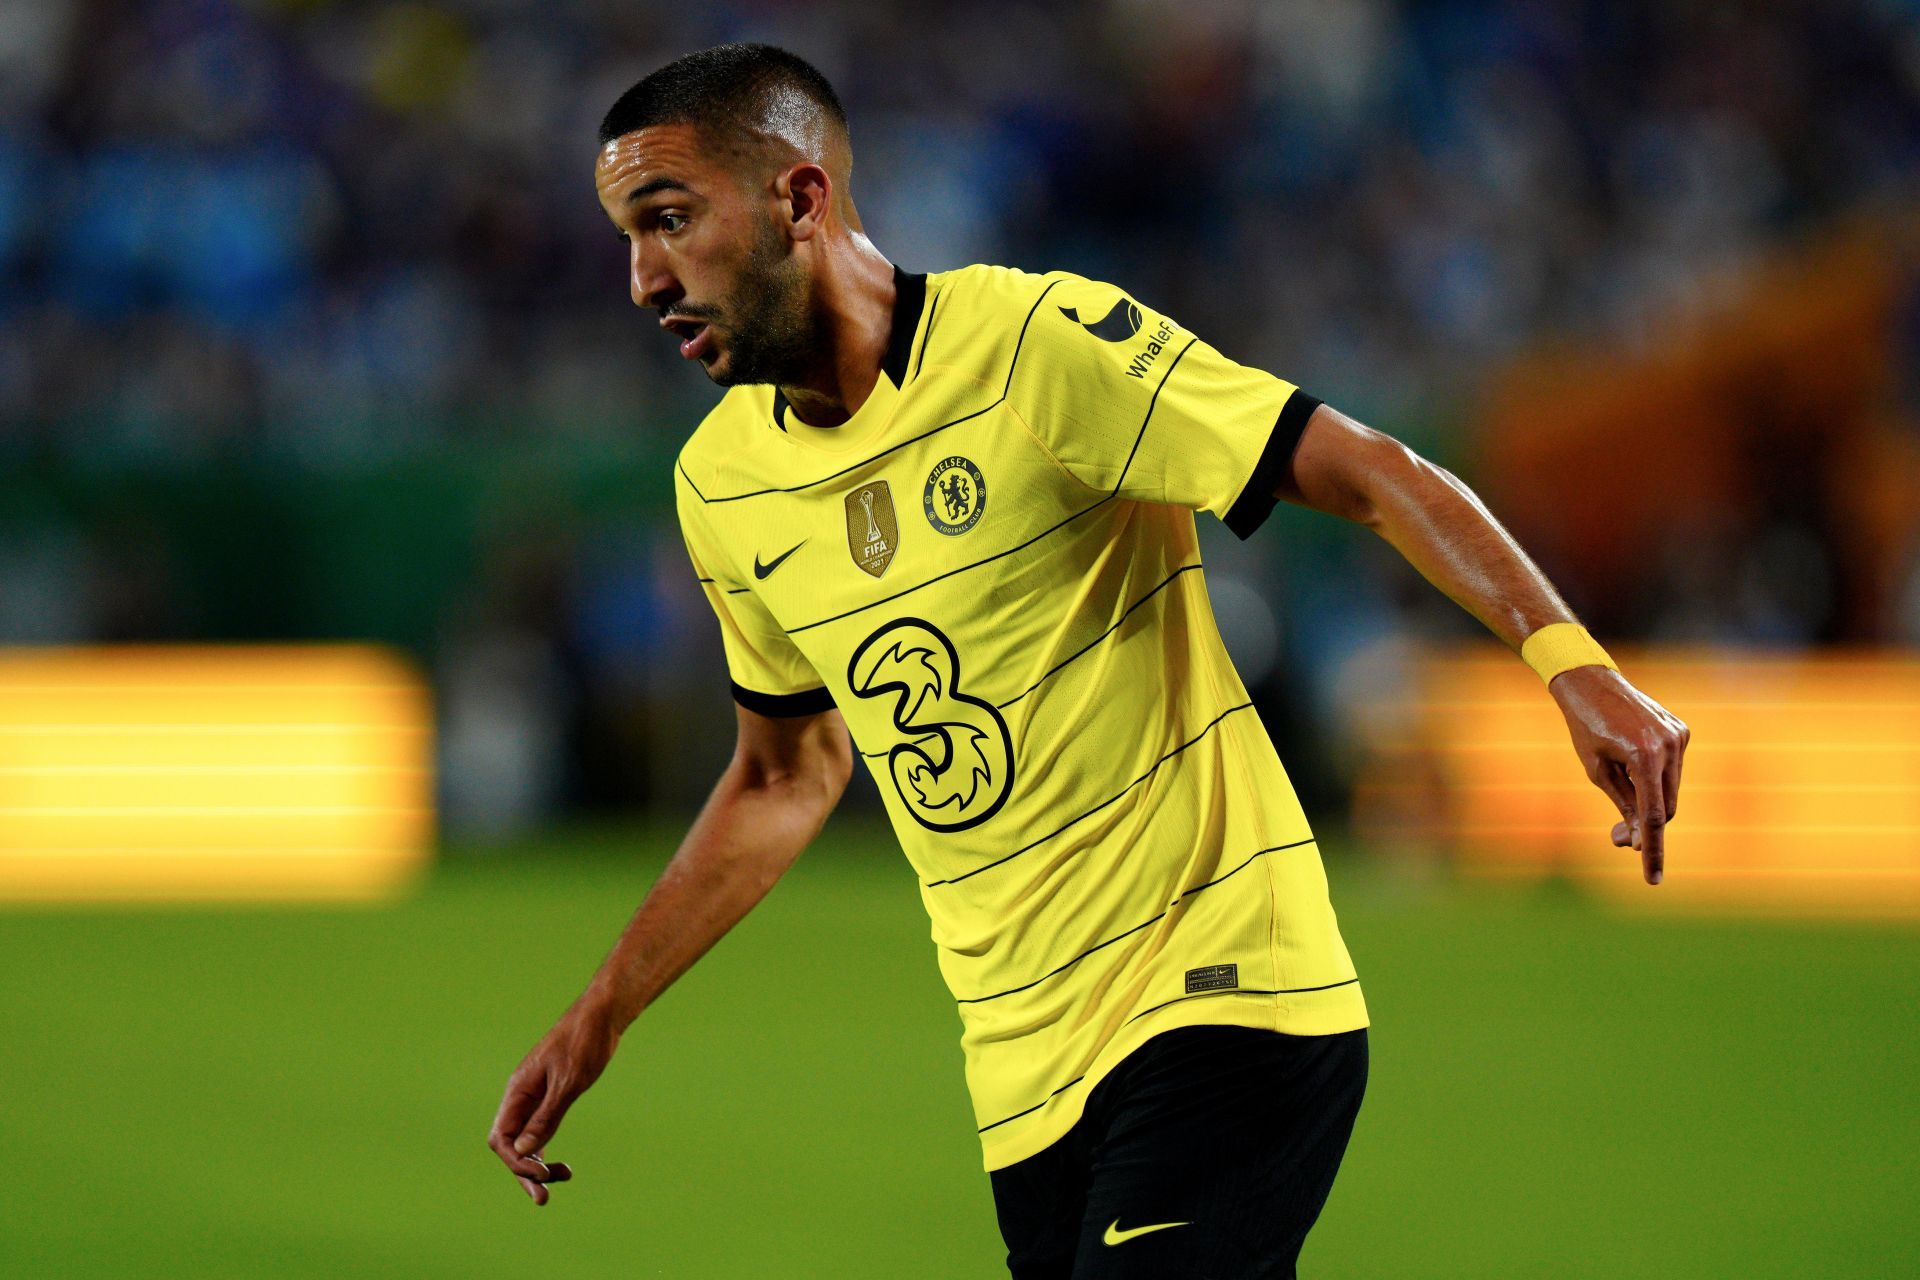 Ziyech has struggled for game time at Chelsea this season